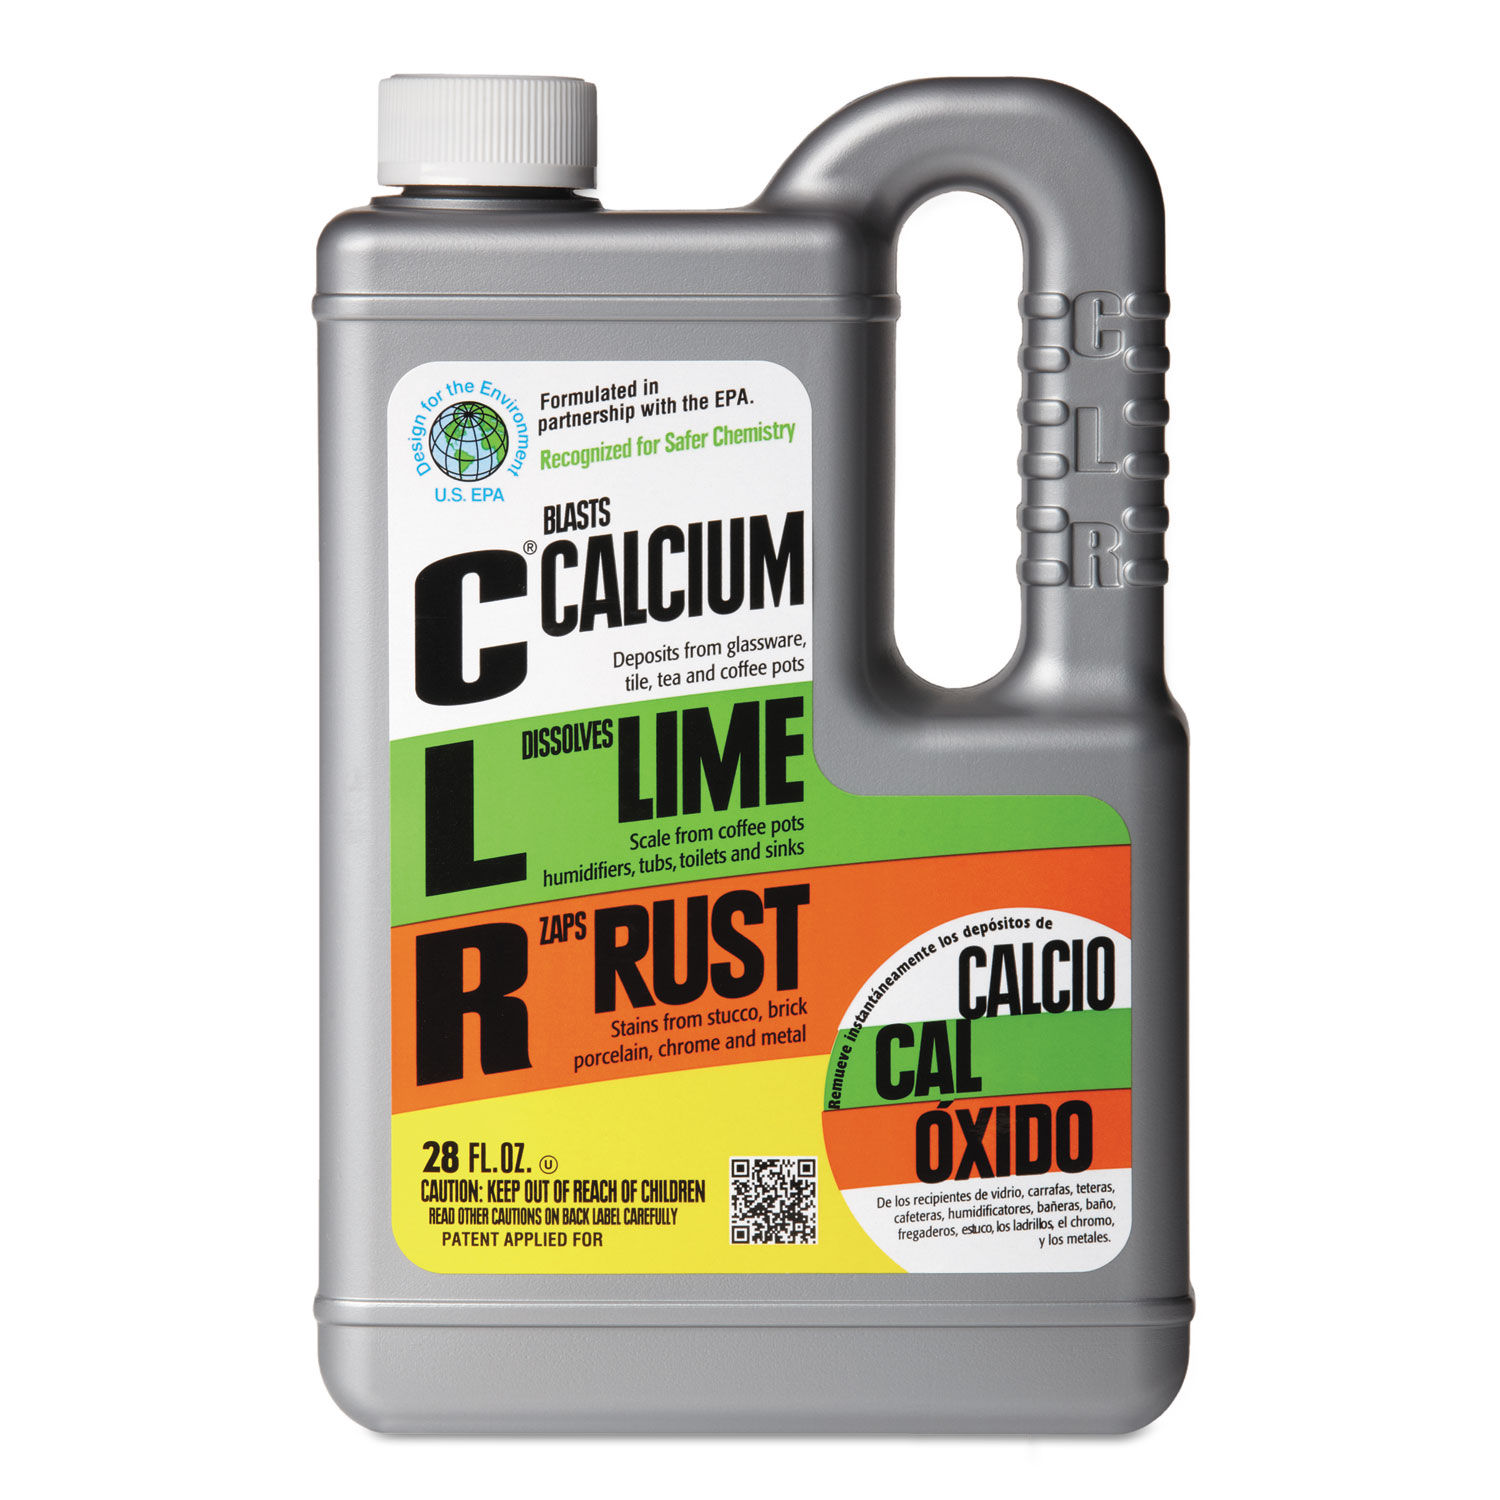 SKILCRAFT Calcium, Lime and Rust Remover, 28 oz Bottle, 12/Carton, GSA 6850016284767